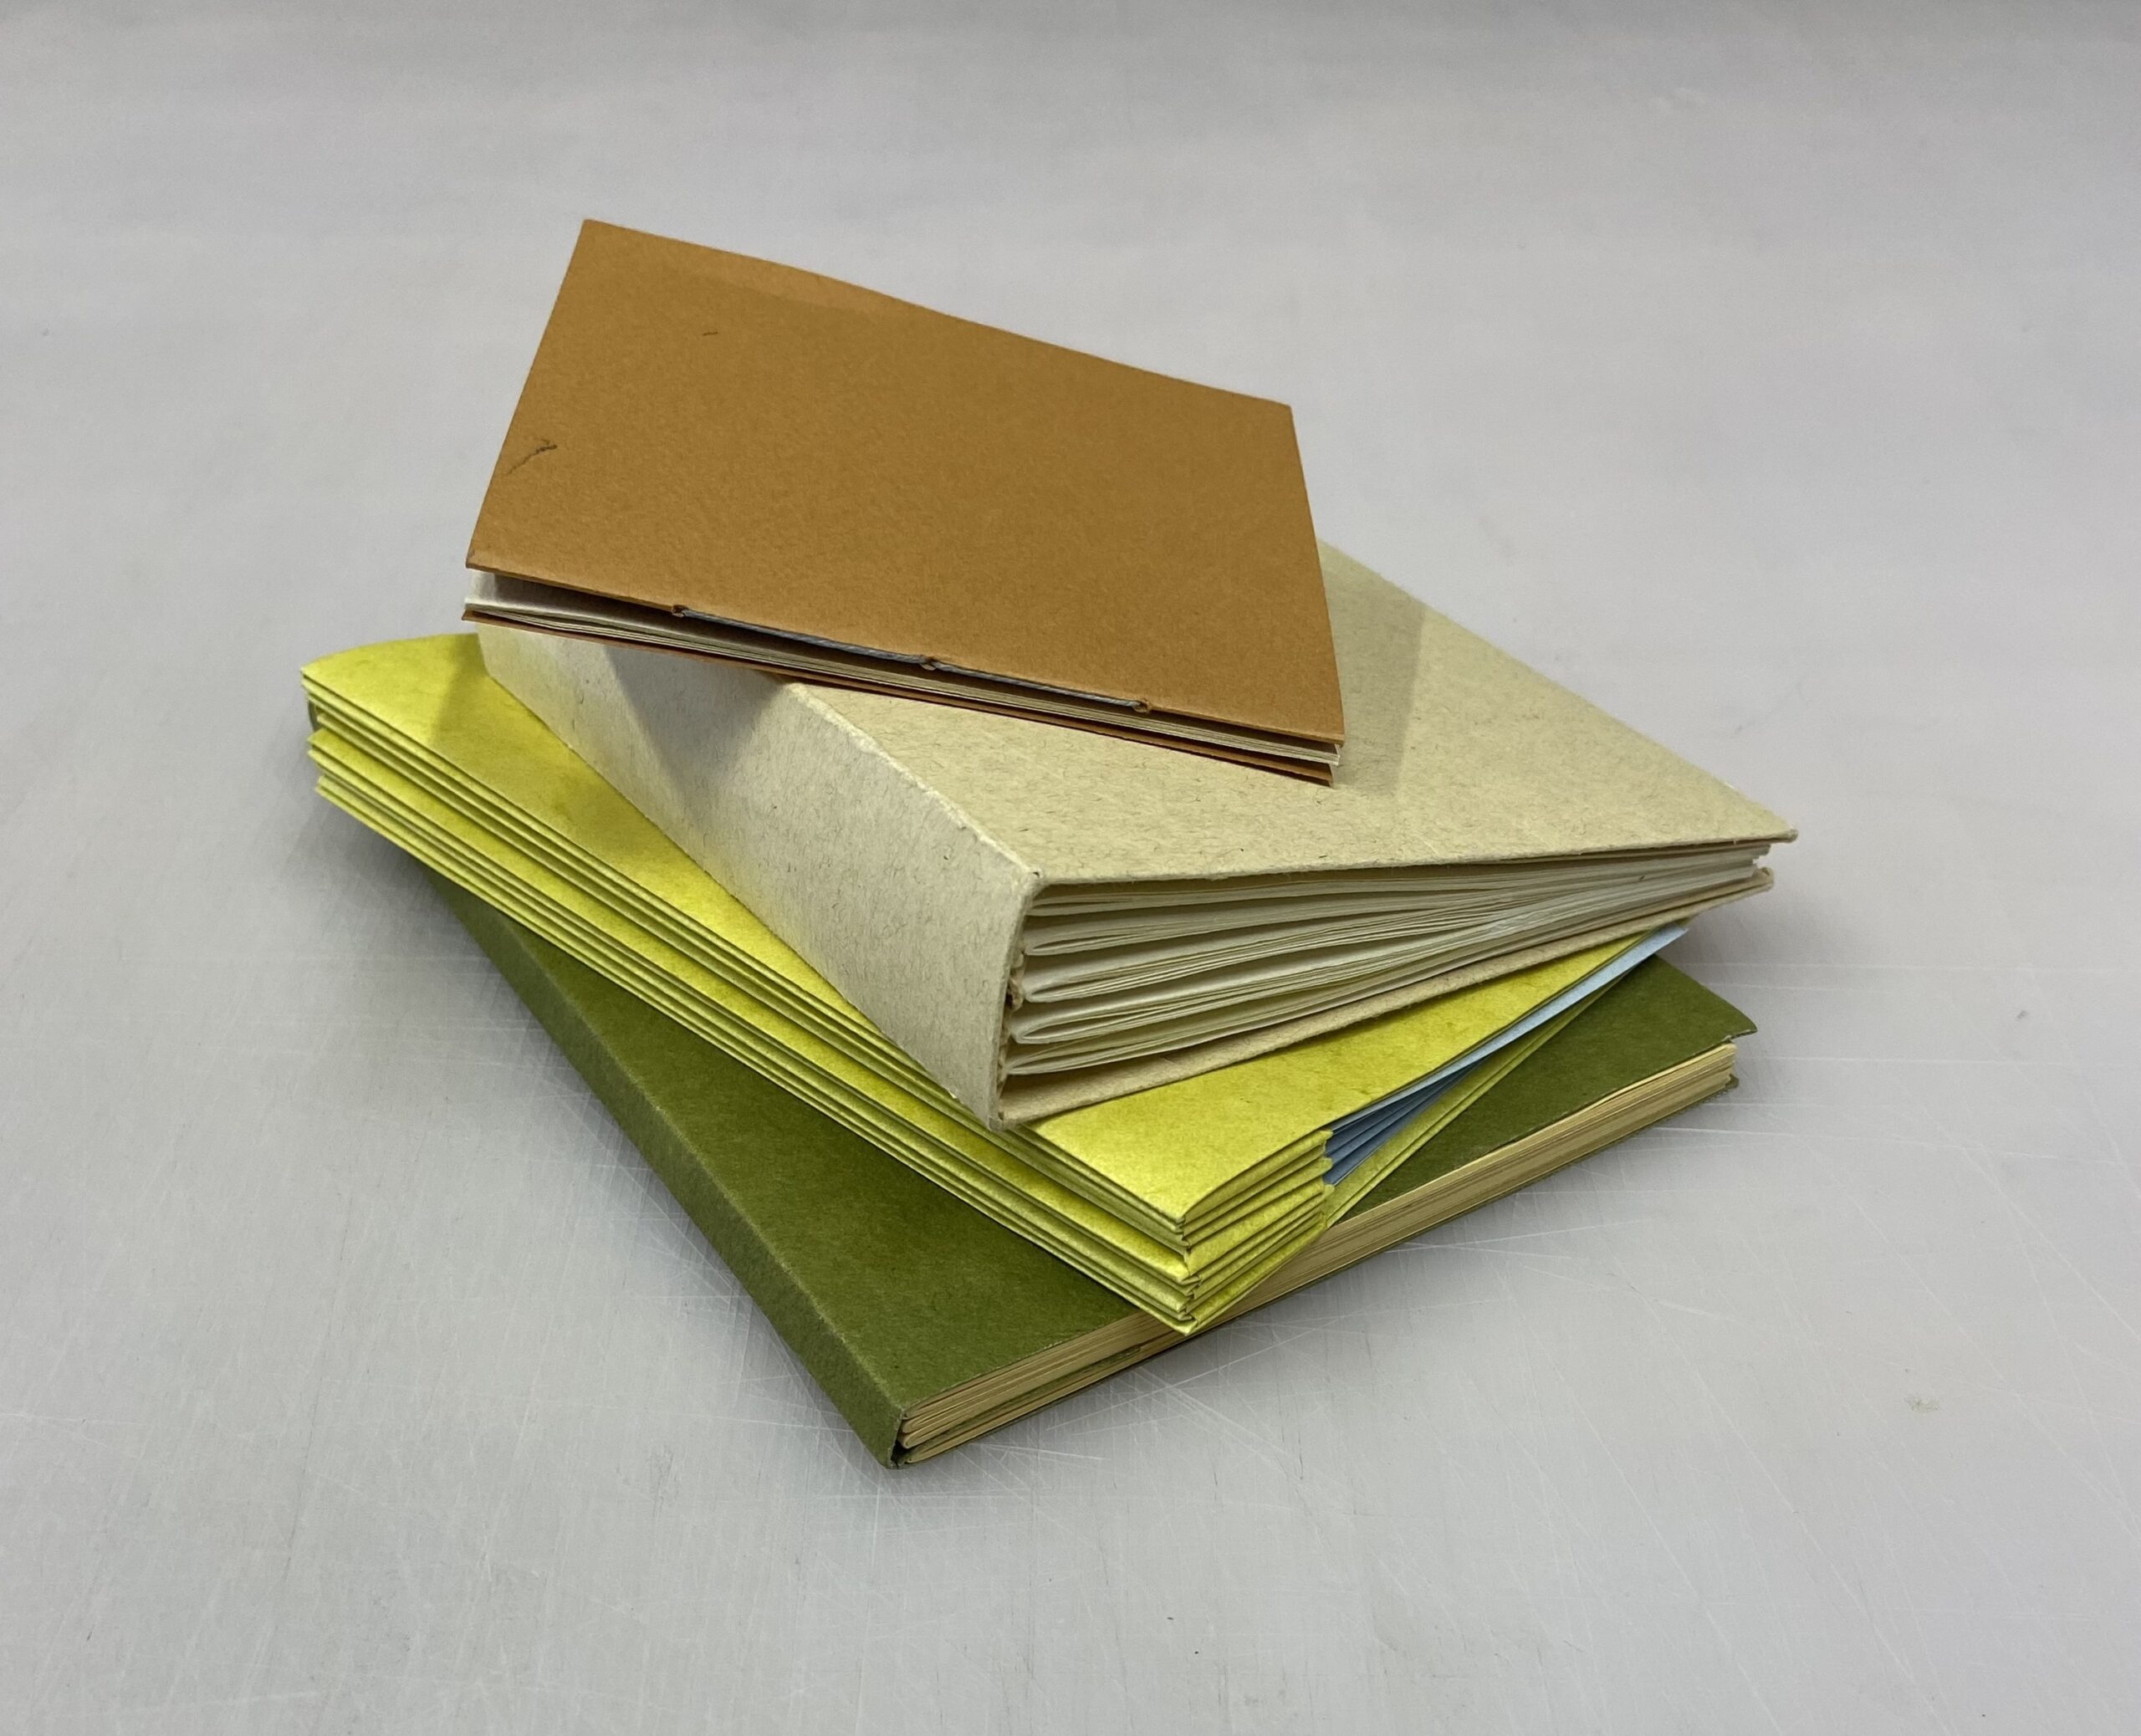 Bookbinding with Paper, Thread, Tape - Center for Book Arts